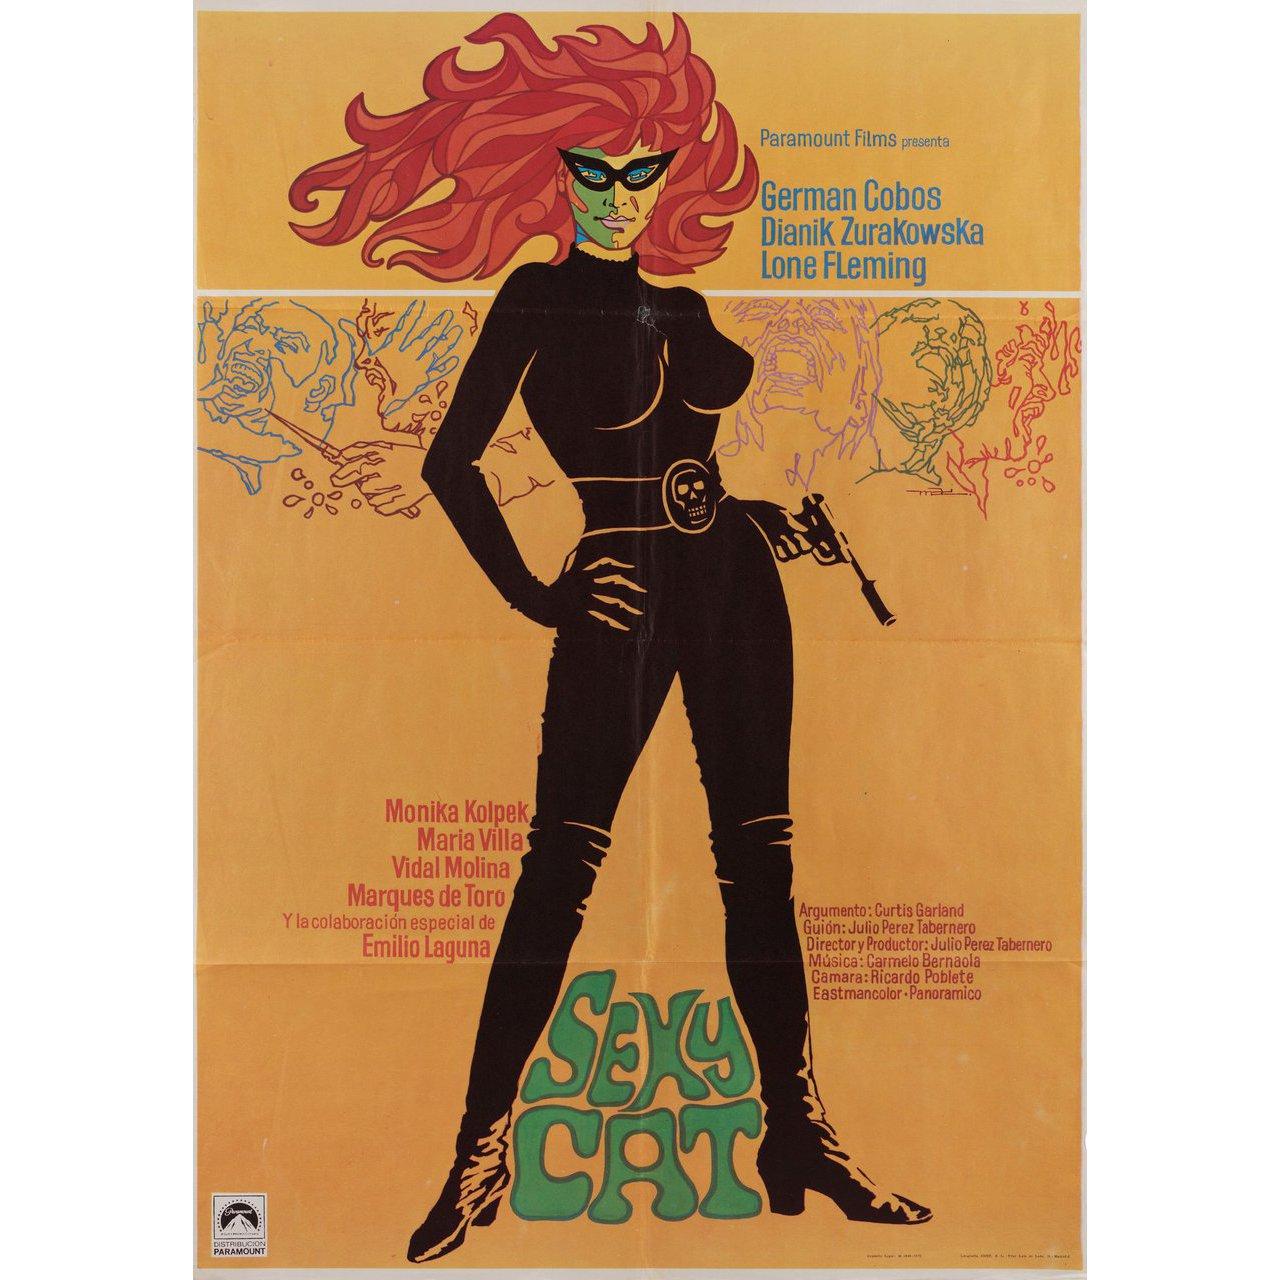 Original 1973 Spanish B1 poster by Macario \Mac\ Gomez for the film Sexy Cat directed by Julio Perez Tabernero with German Cobos / Marques de Toro / Lone Fleming / Monika Kolpek. Very Good condition, folded with fold separation. Many original